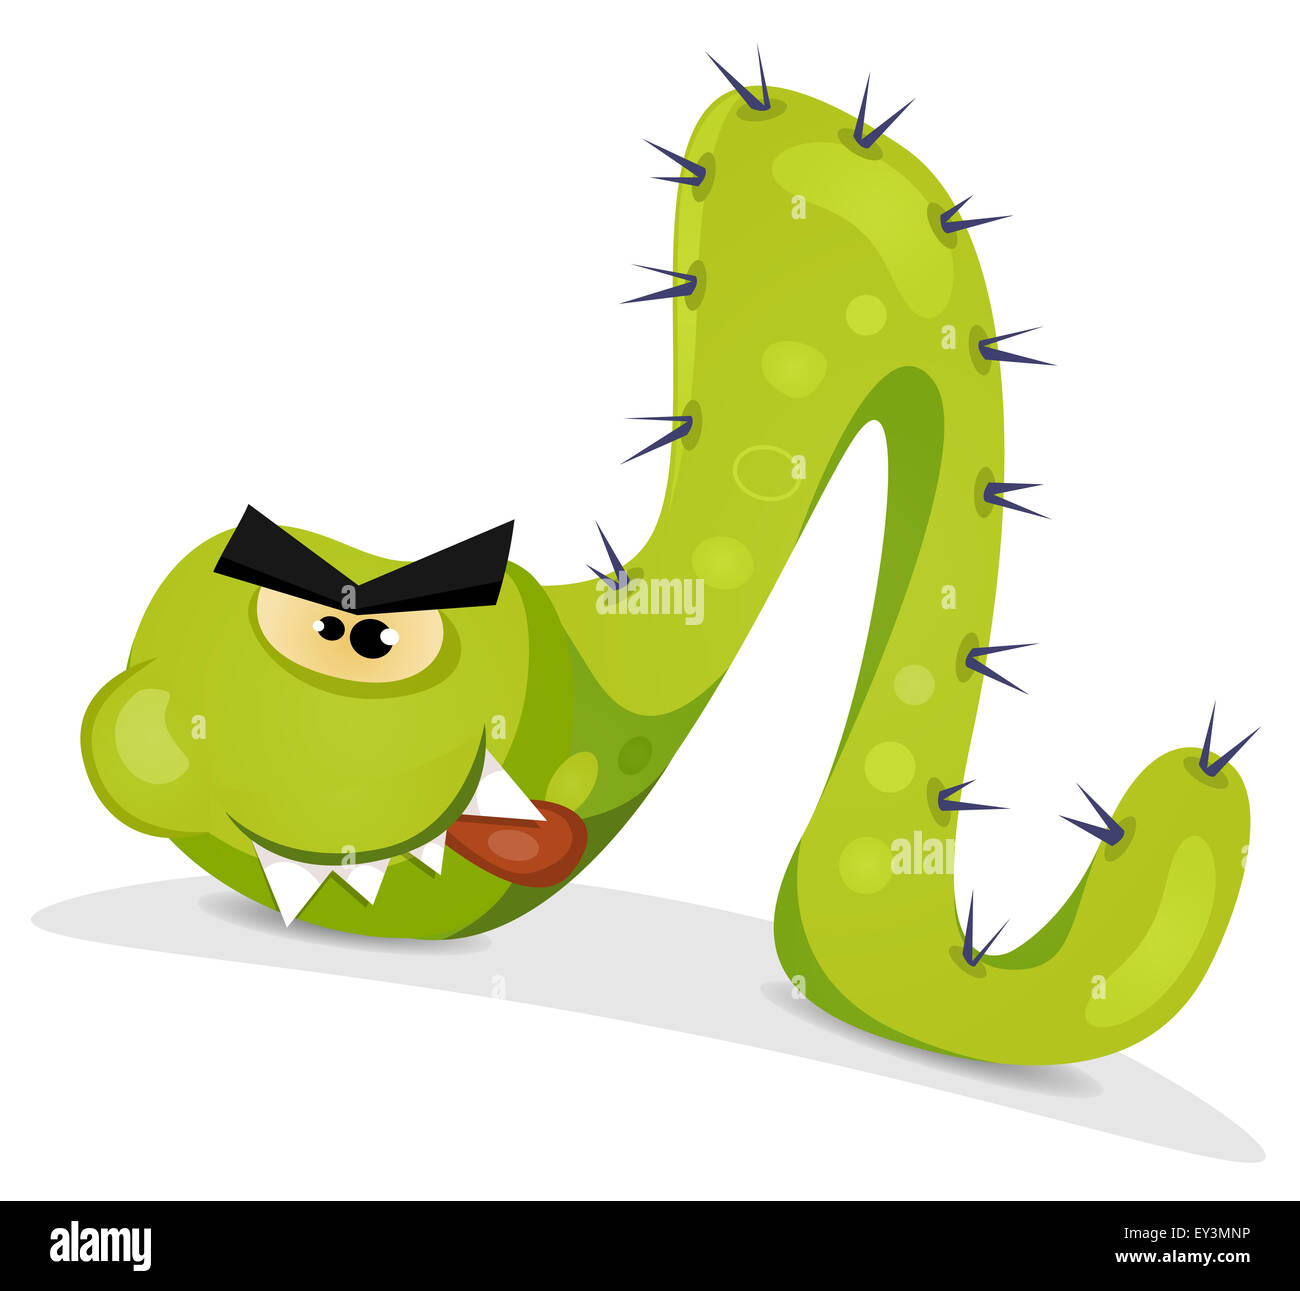 Cartoon Happy Worm With Mustache Or Beard In Grass. Crawling Worm